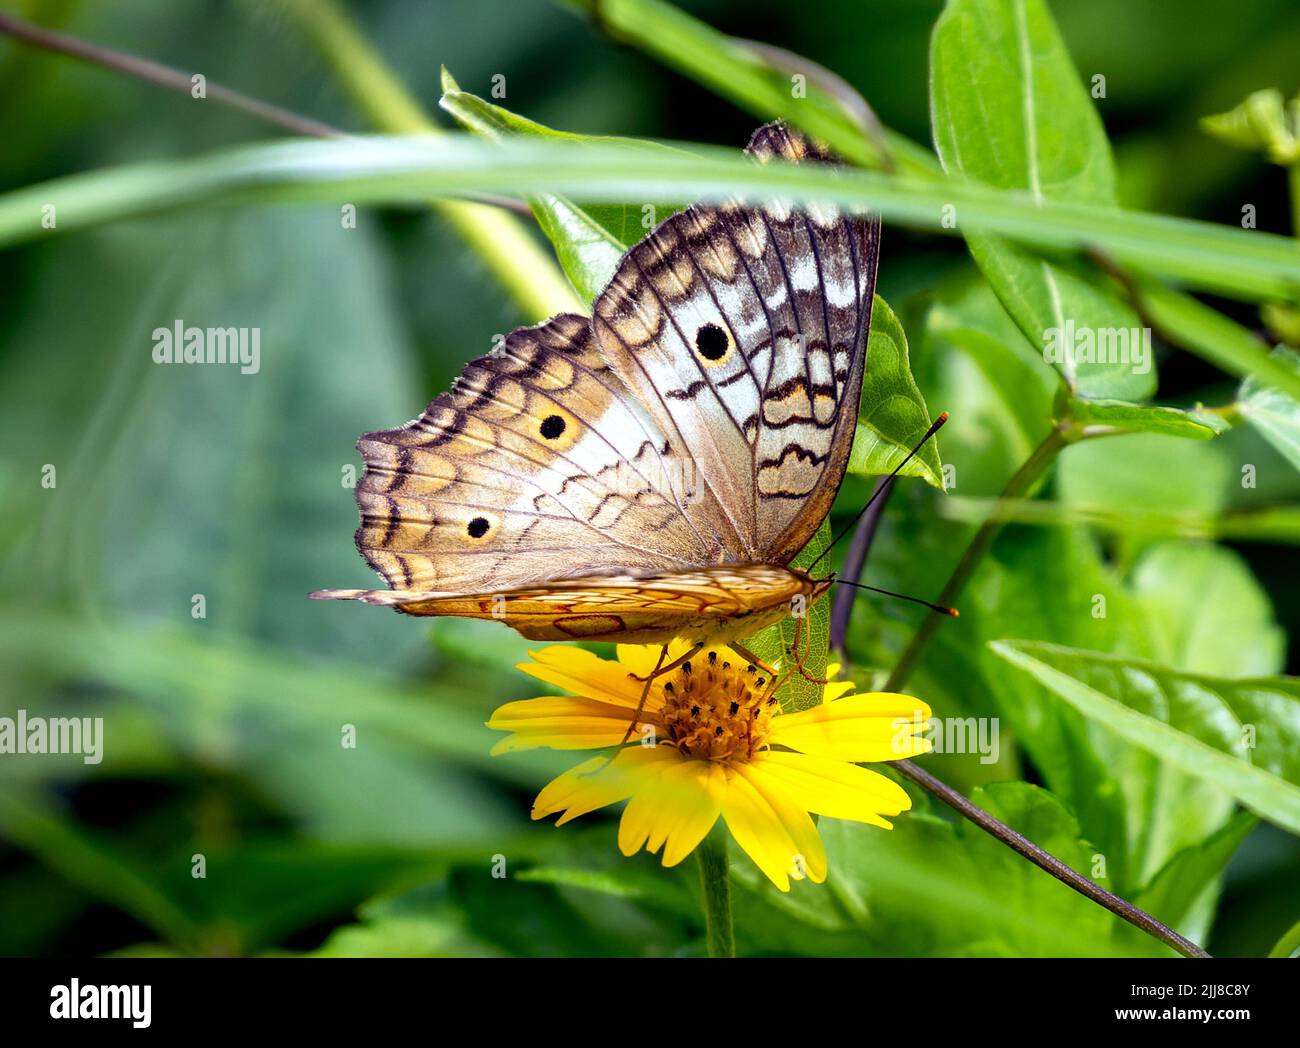 White Peacock butterfly on yellow flower, Costa Rica Stock Photo